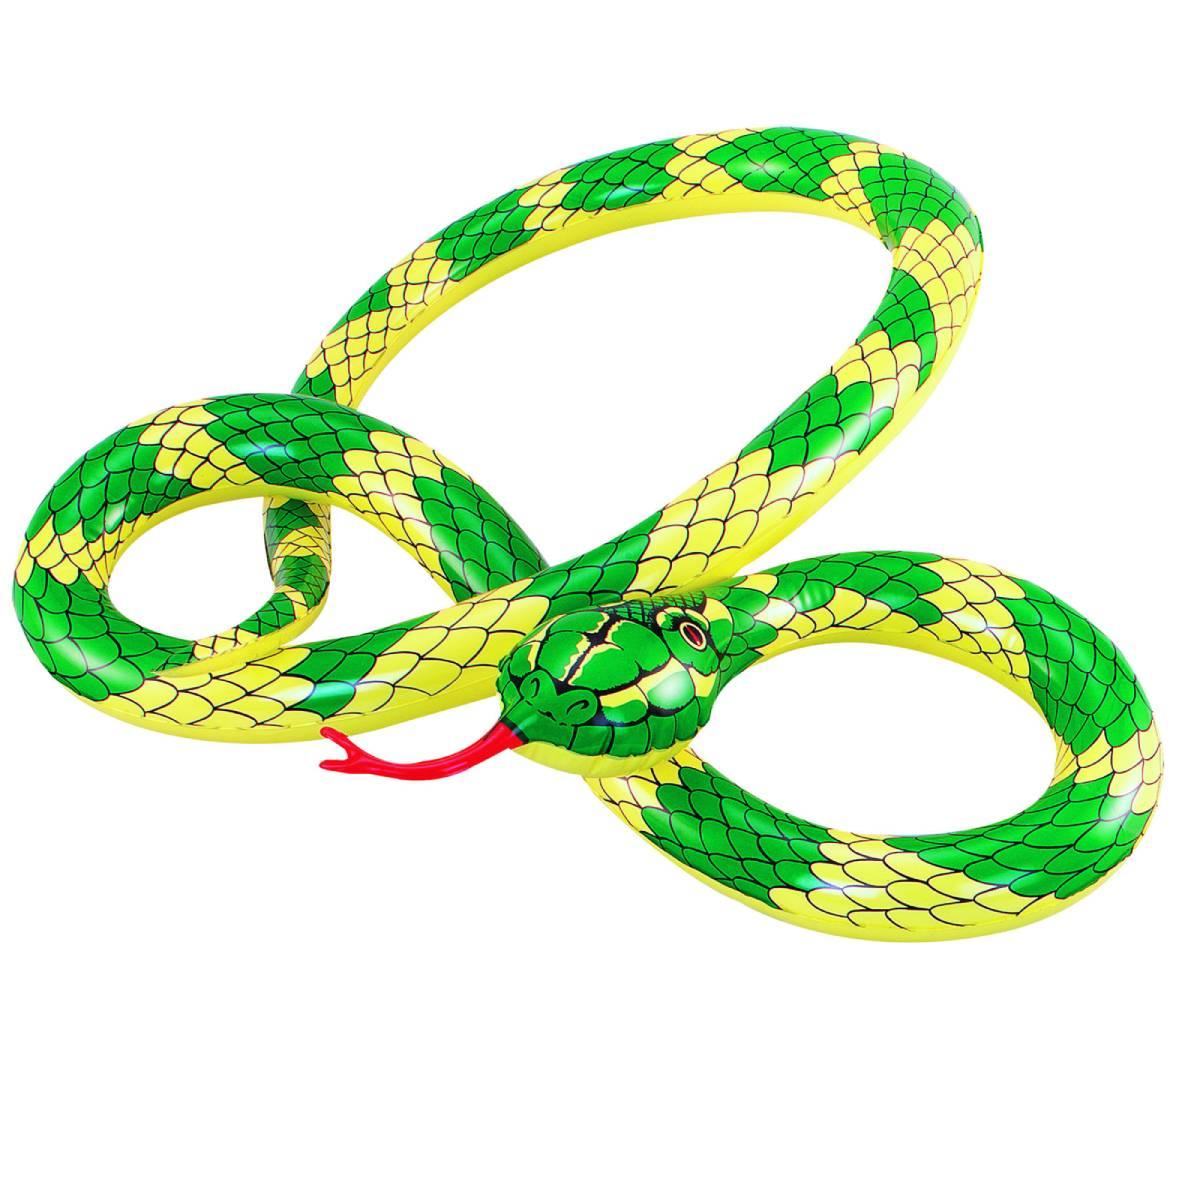 Inflatable Snake by Henbrandt IJ026 230cm long available here at Karnival Costumes online party shop